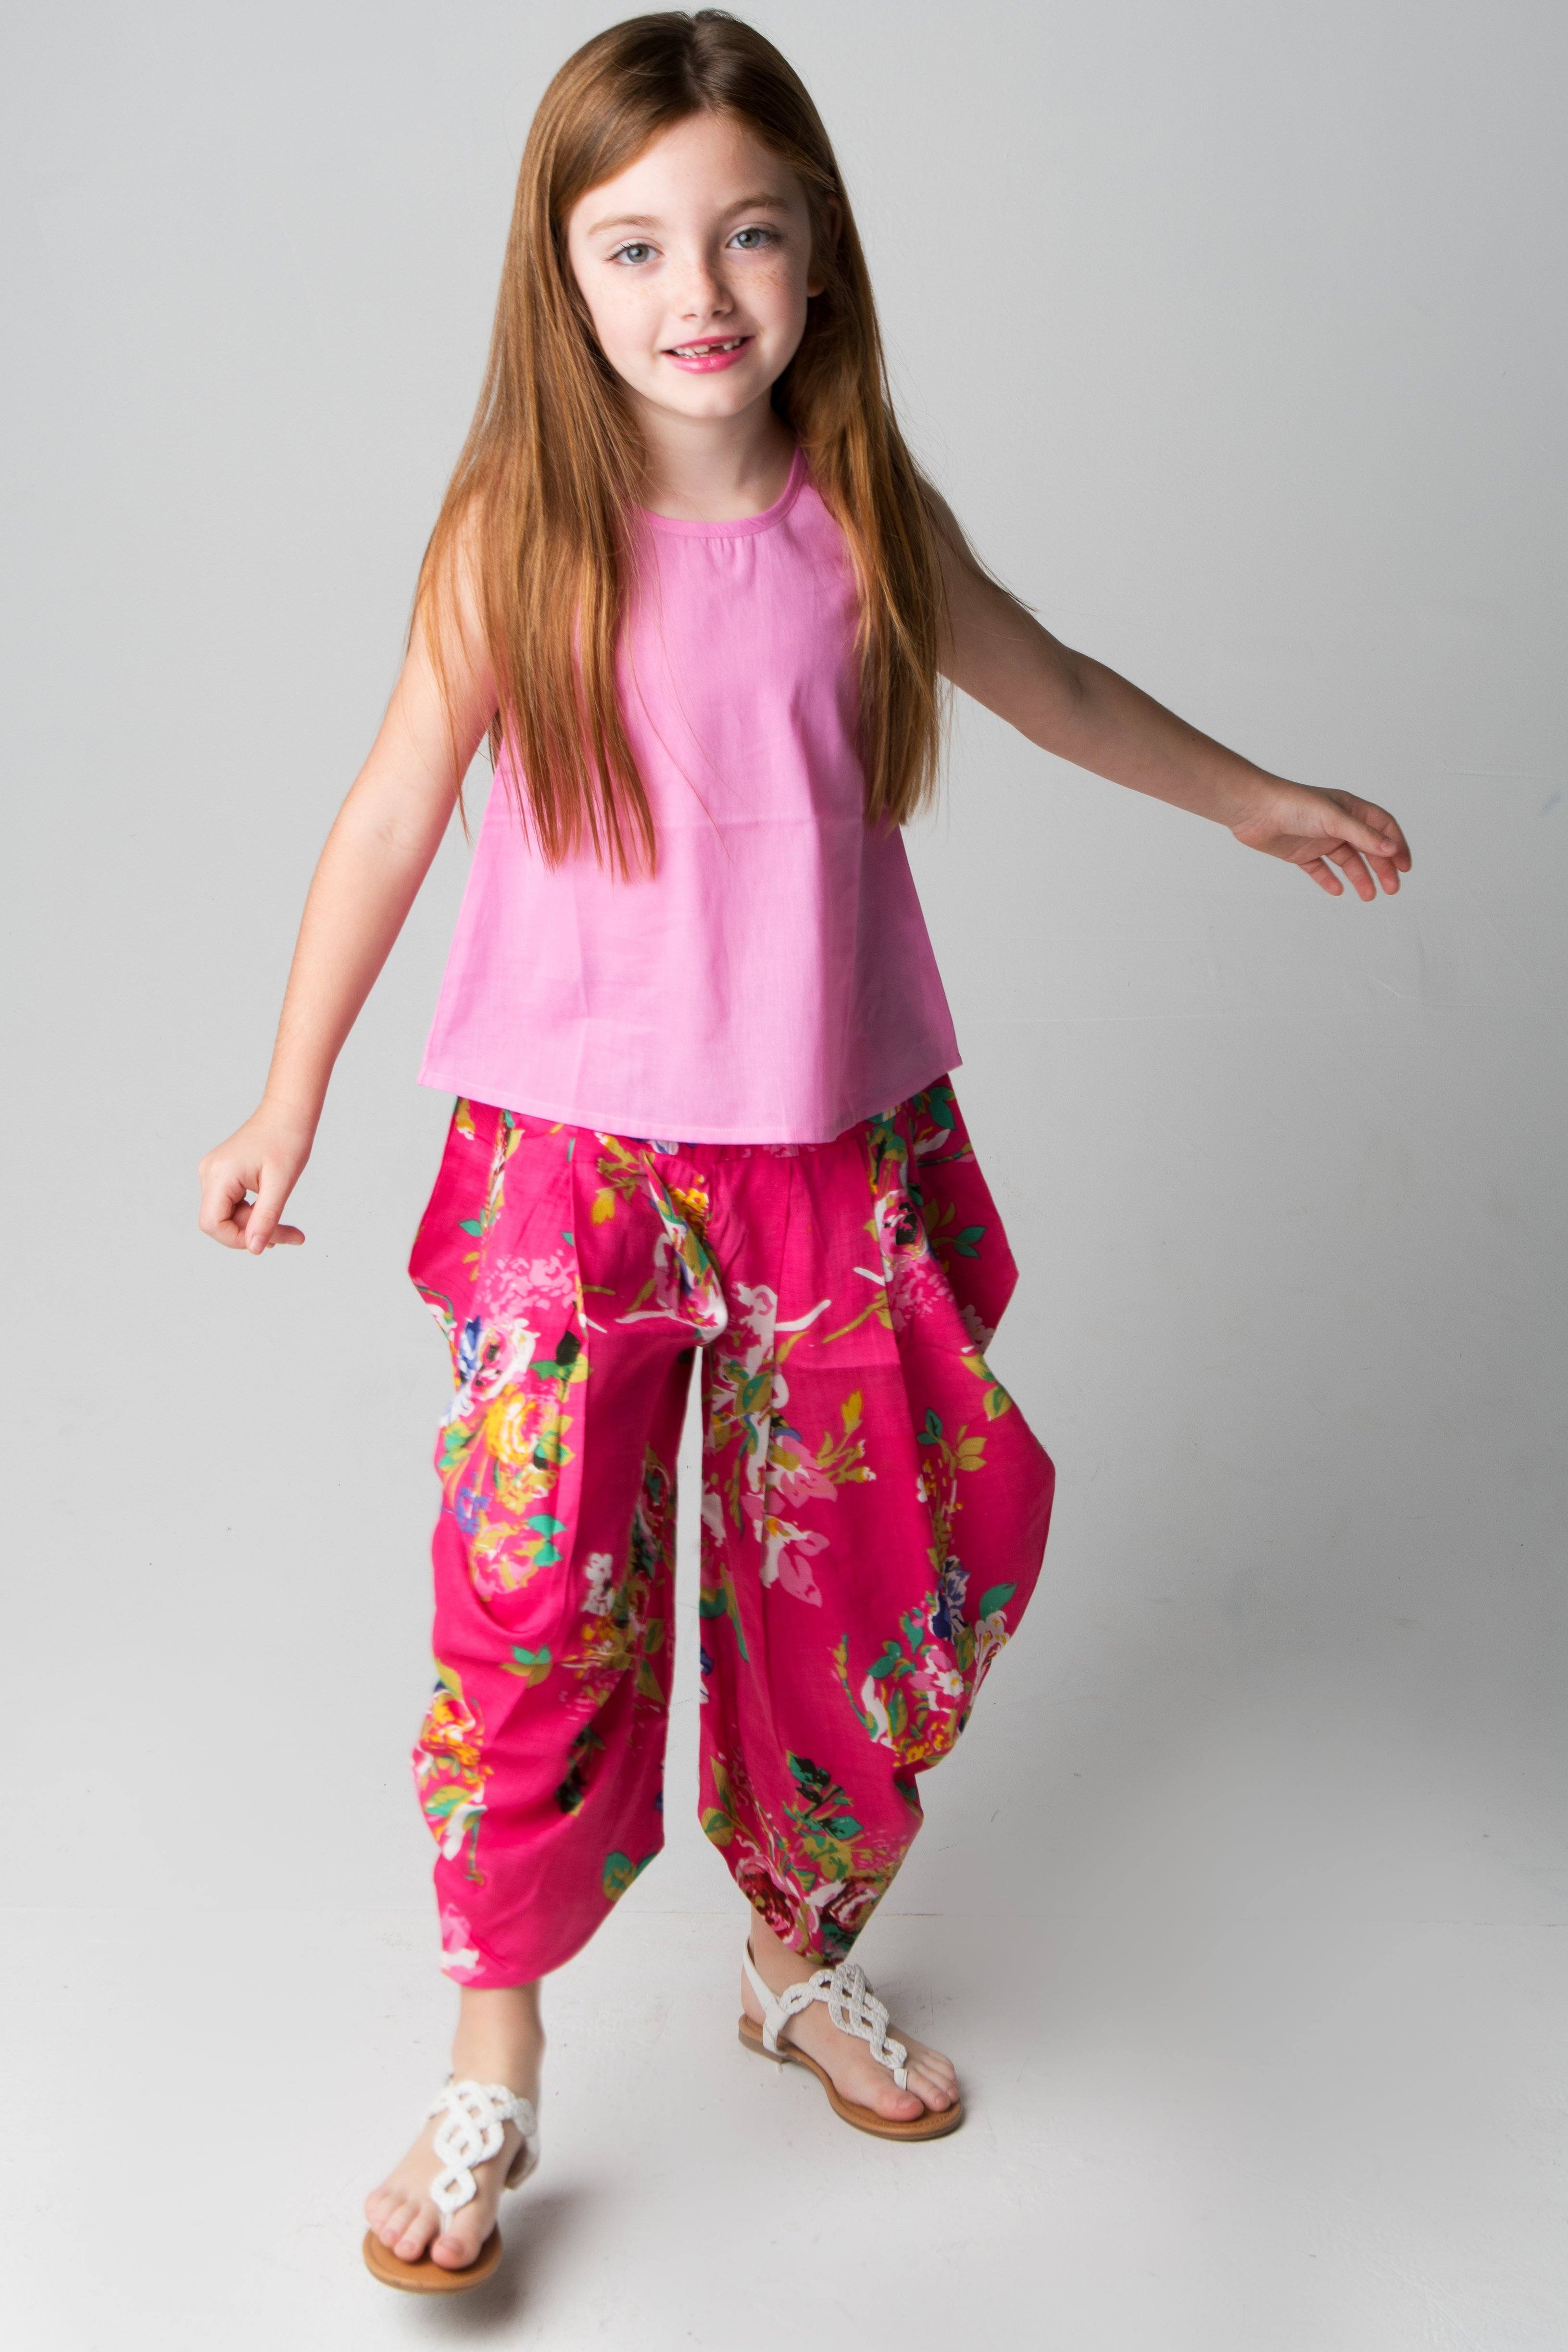 GO COLORS Girls Young Pink Harem Pants - Ages 2-14 Years (6-7 Years) :  Amazon.in: Clothing & Accessories